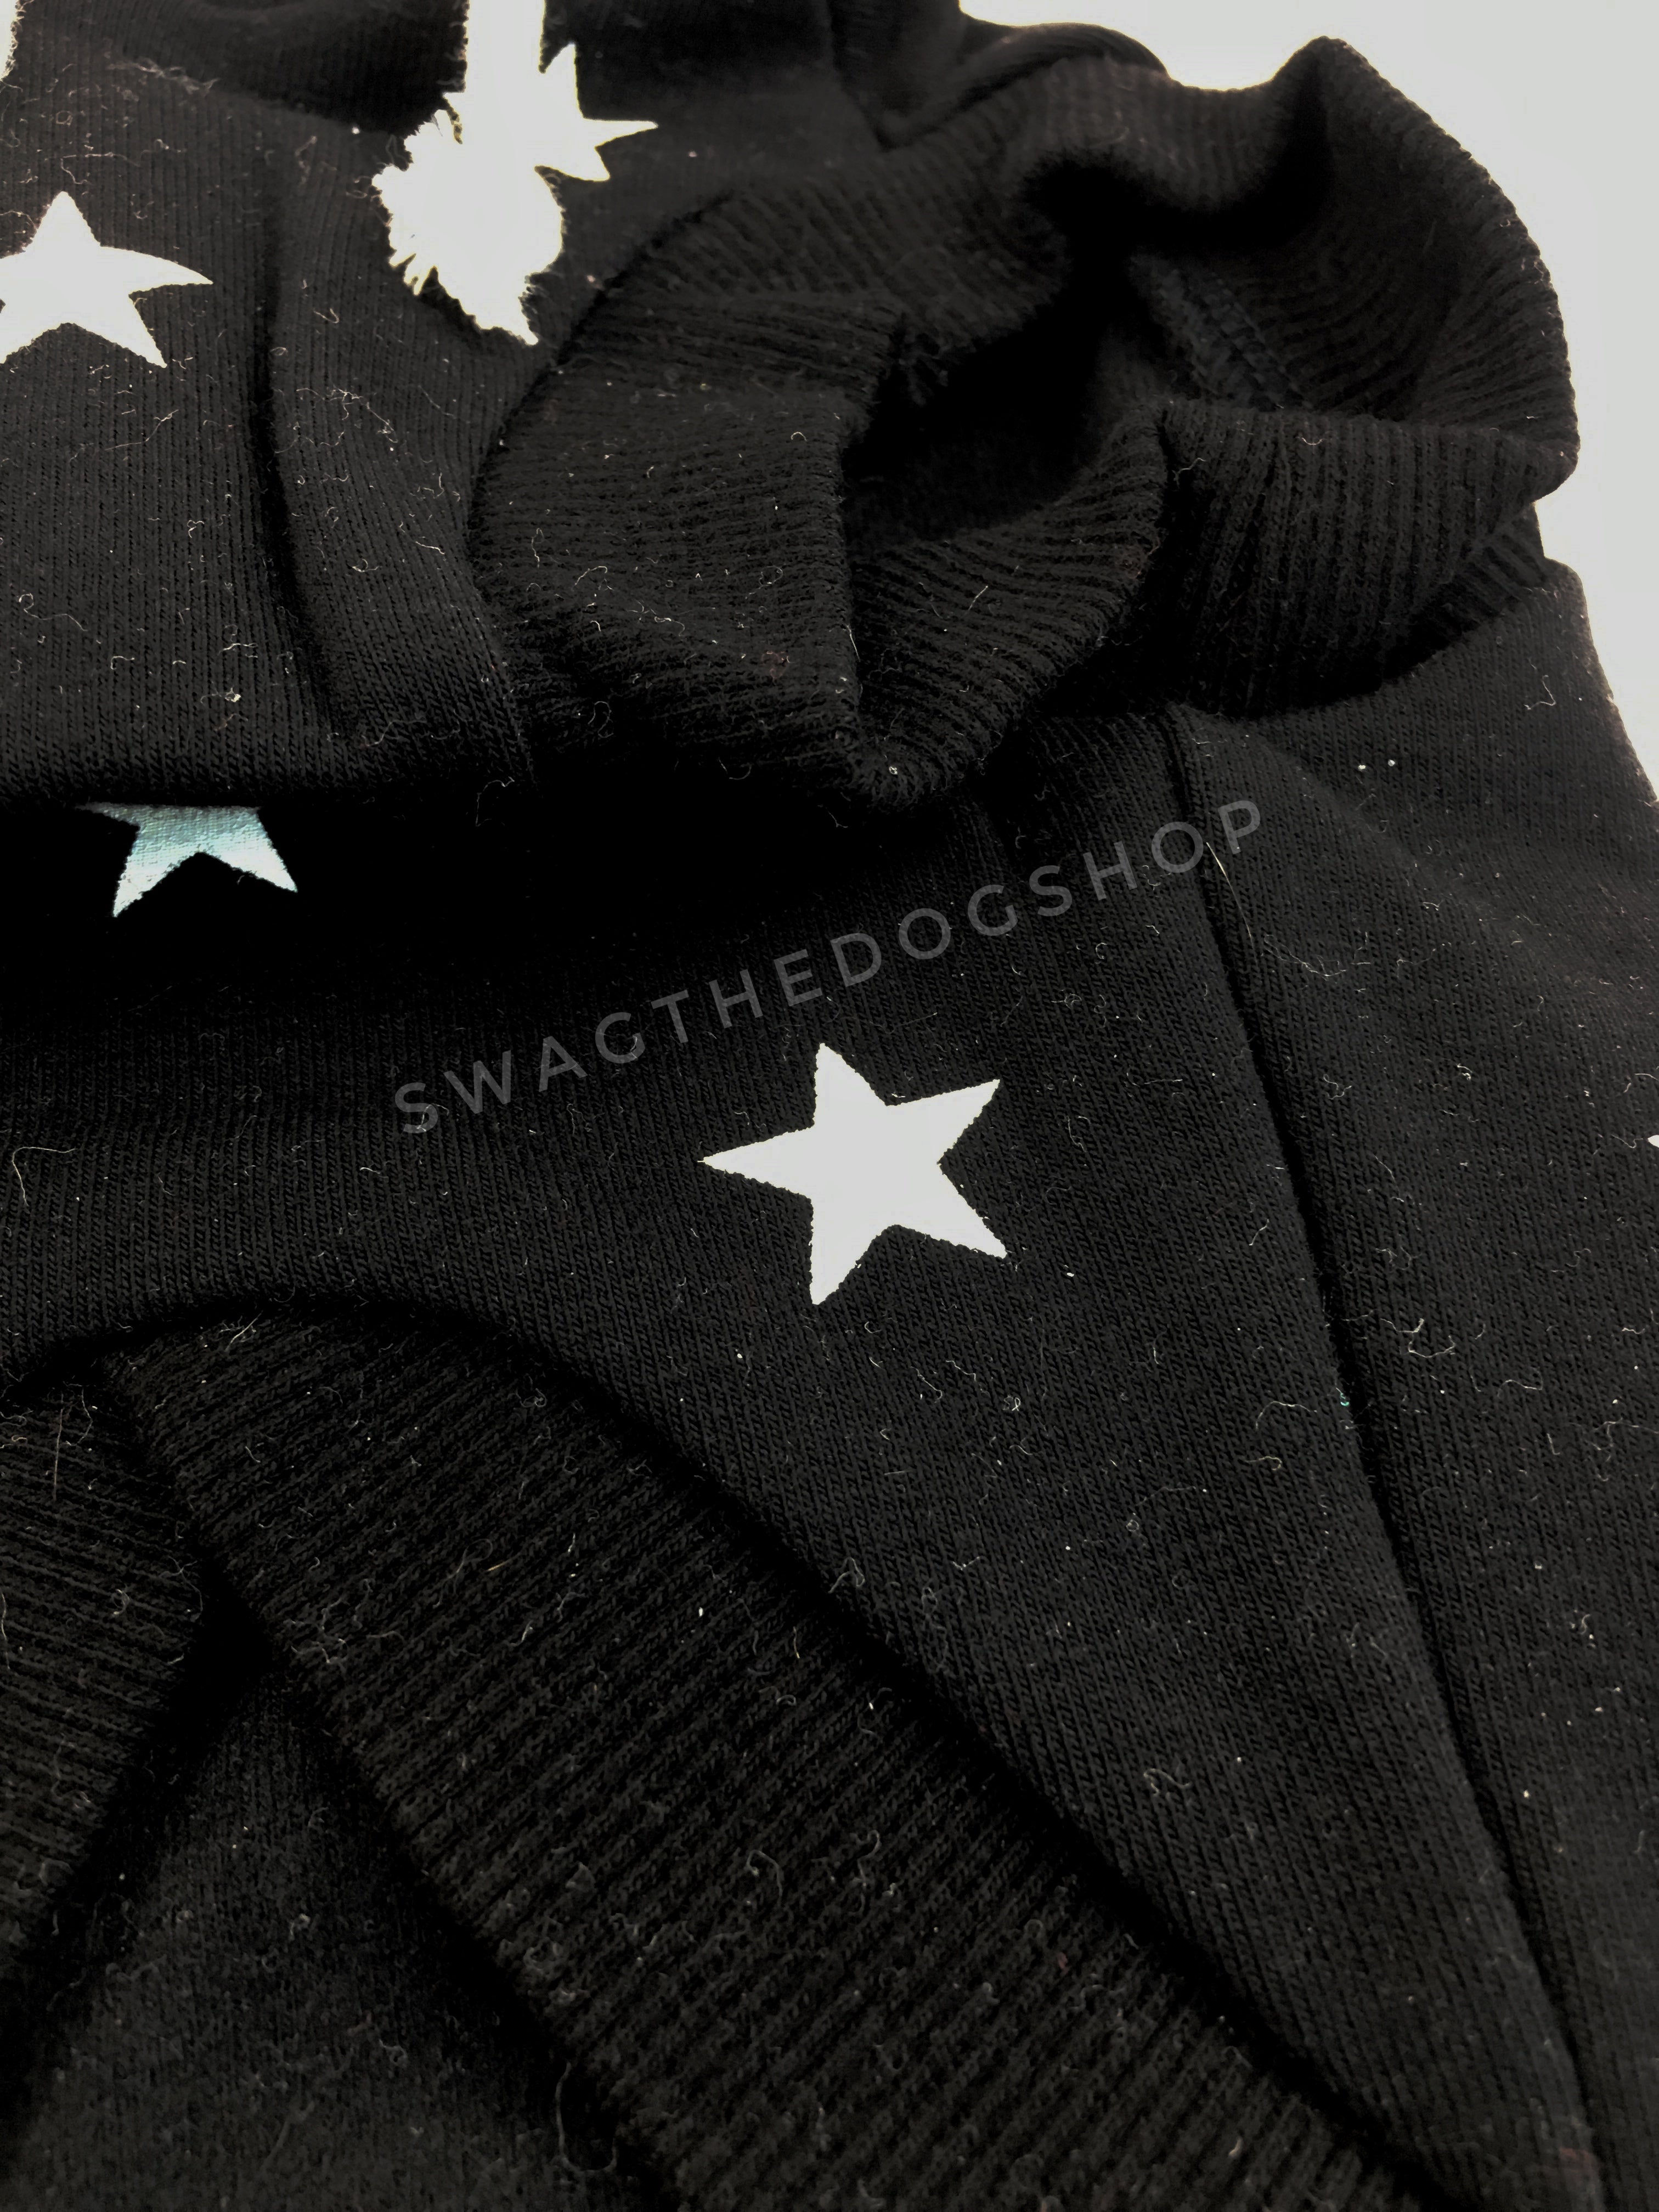 All-Star Black Hoodie - Close up of front. Black and White Star Hoodie